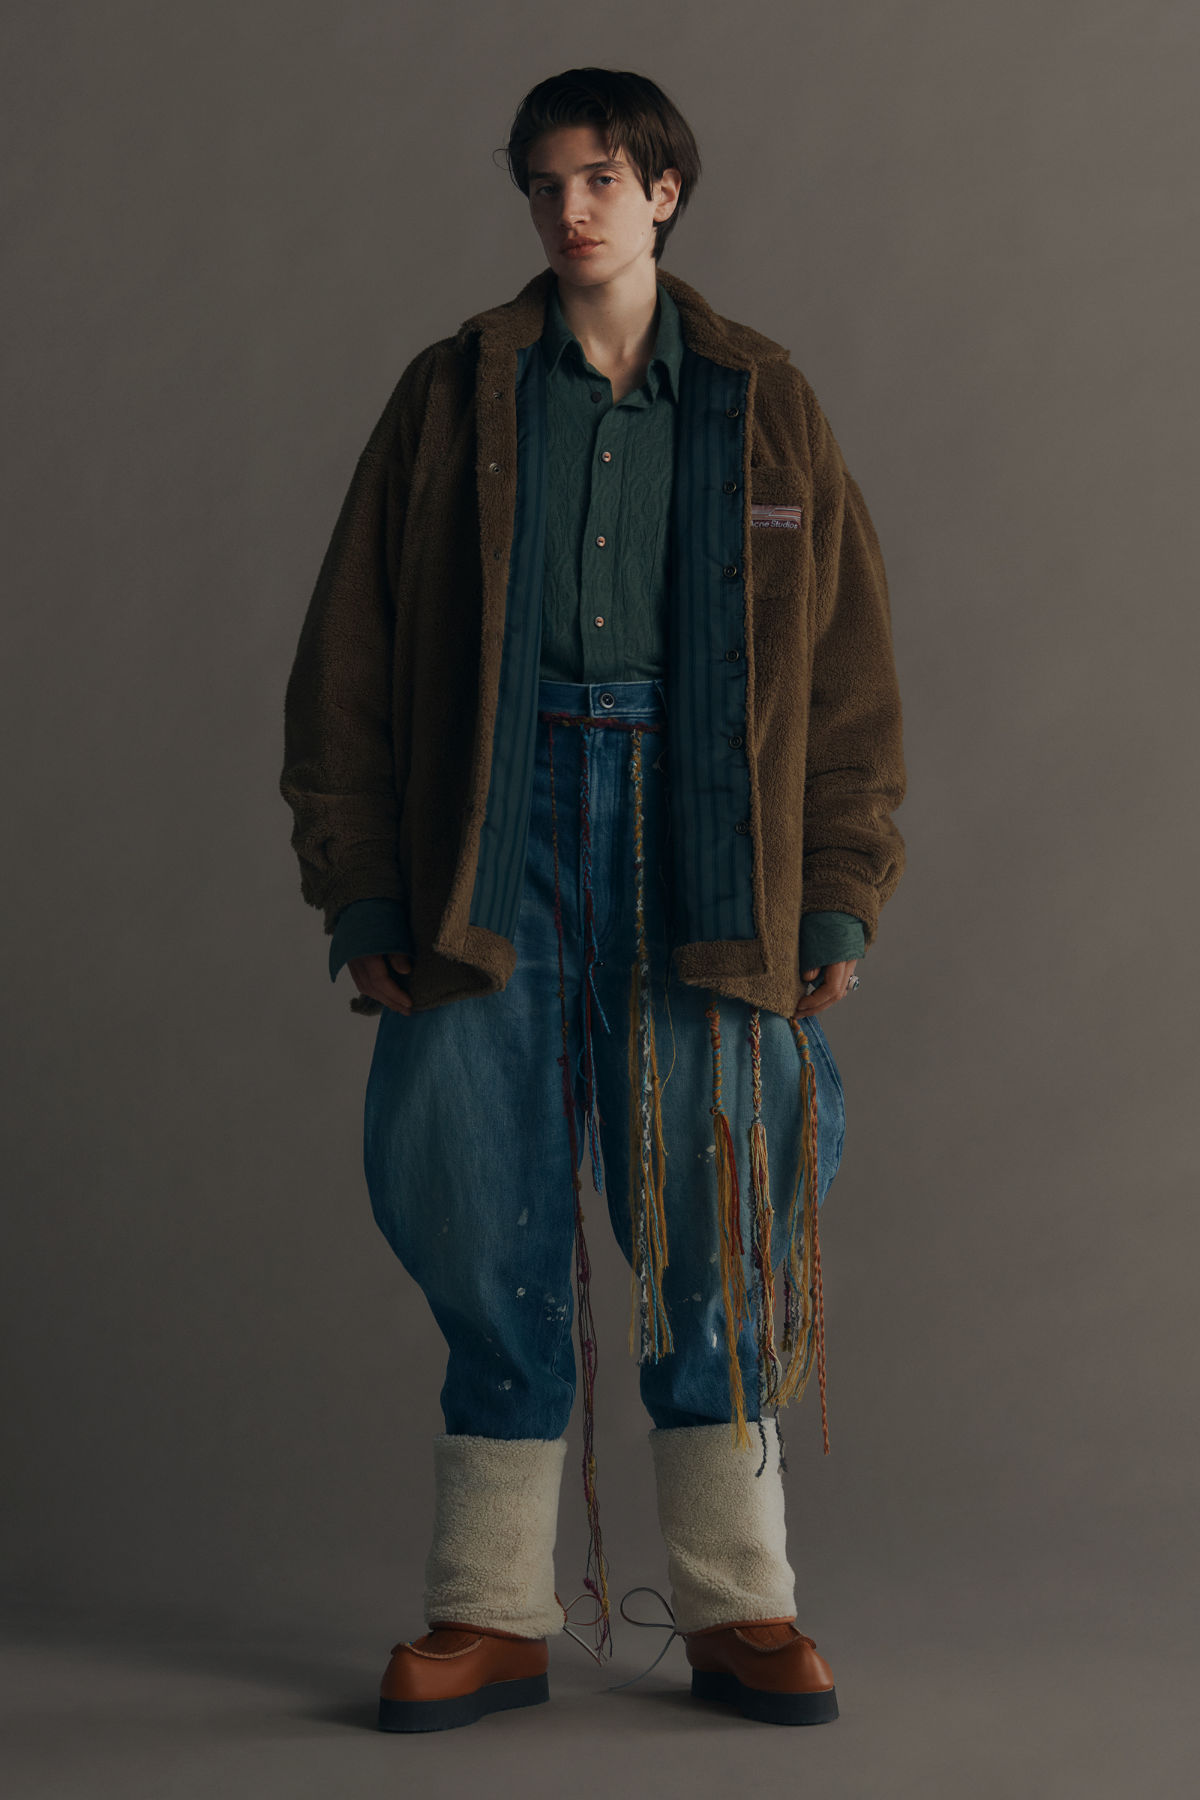 Acne Studios Presents Its New Fall Winter 2022 Men's Collection